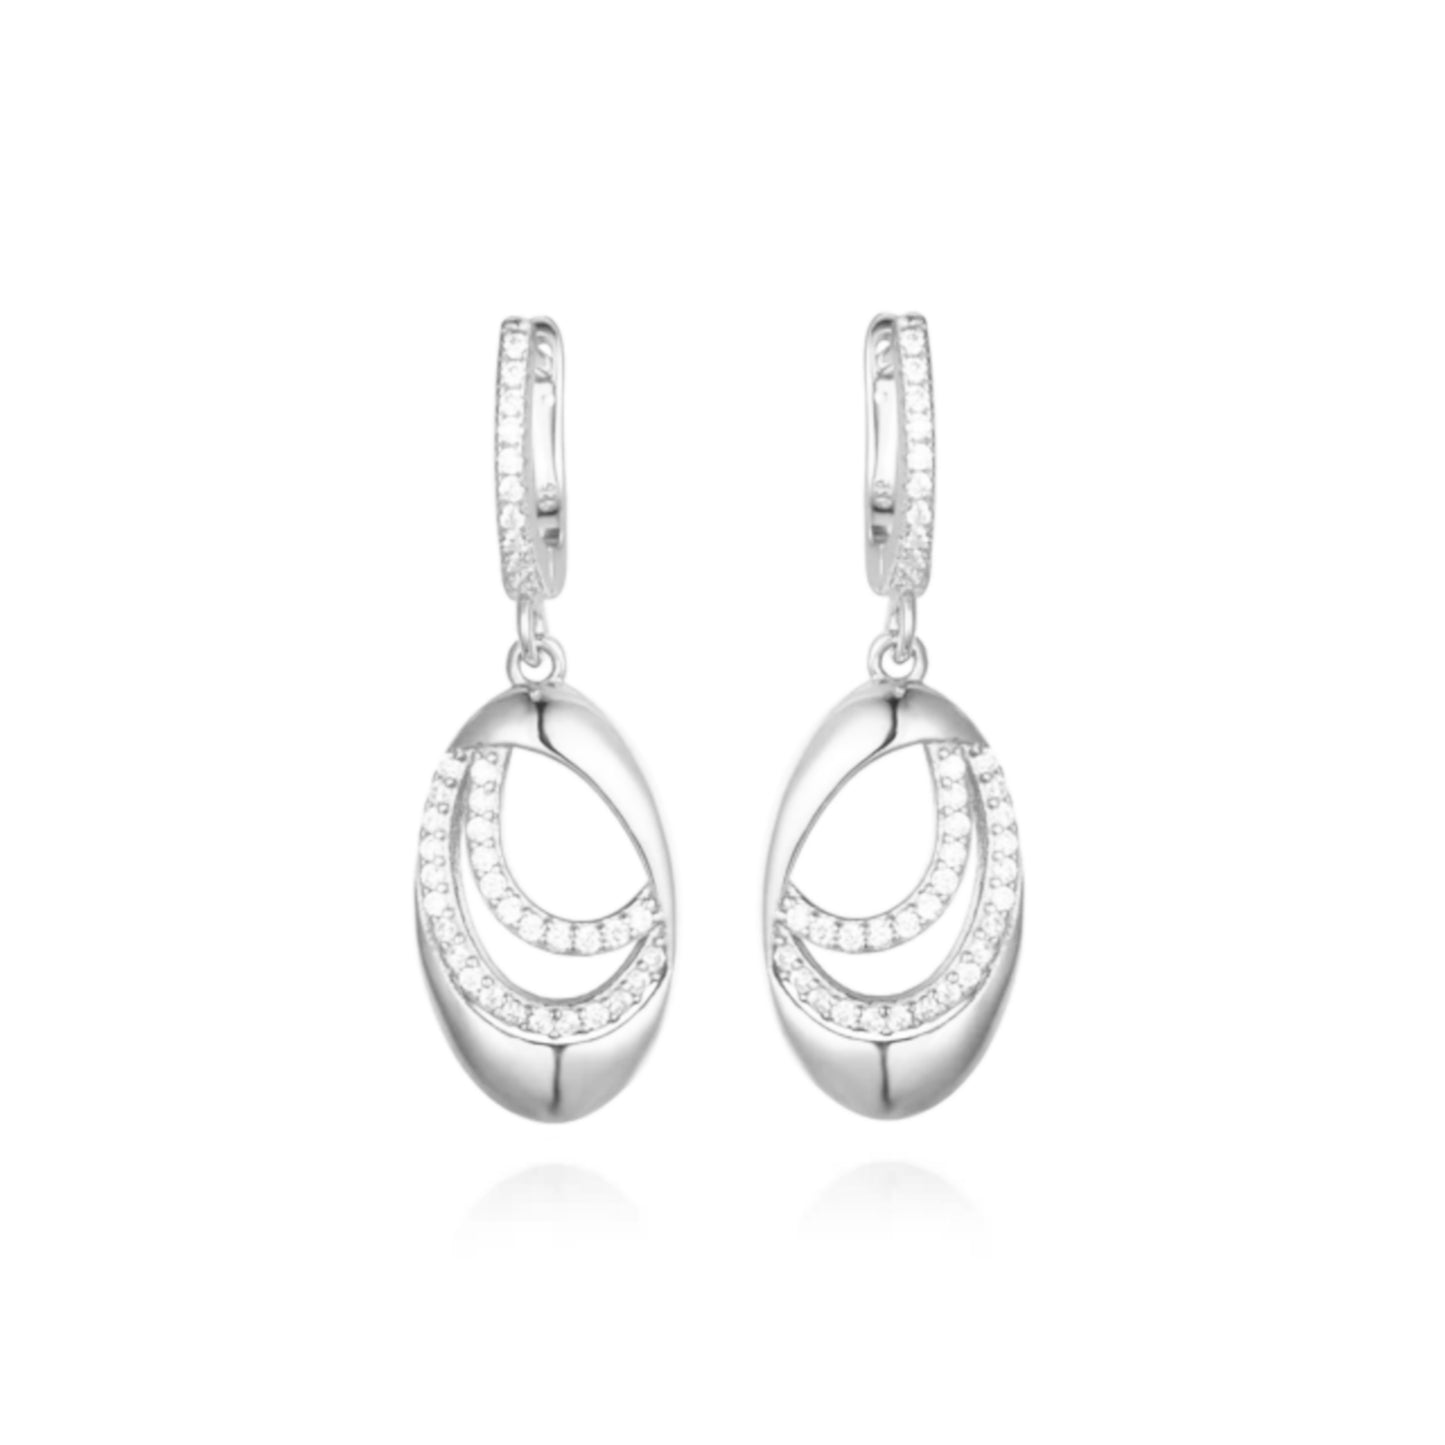 Sterling Silver Oval With Two Curved Lines of CZs Earrings - HK Jewels